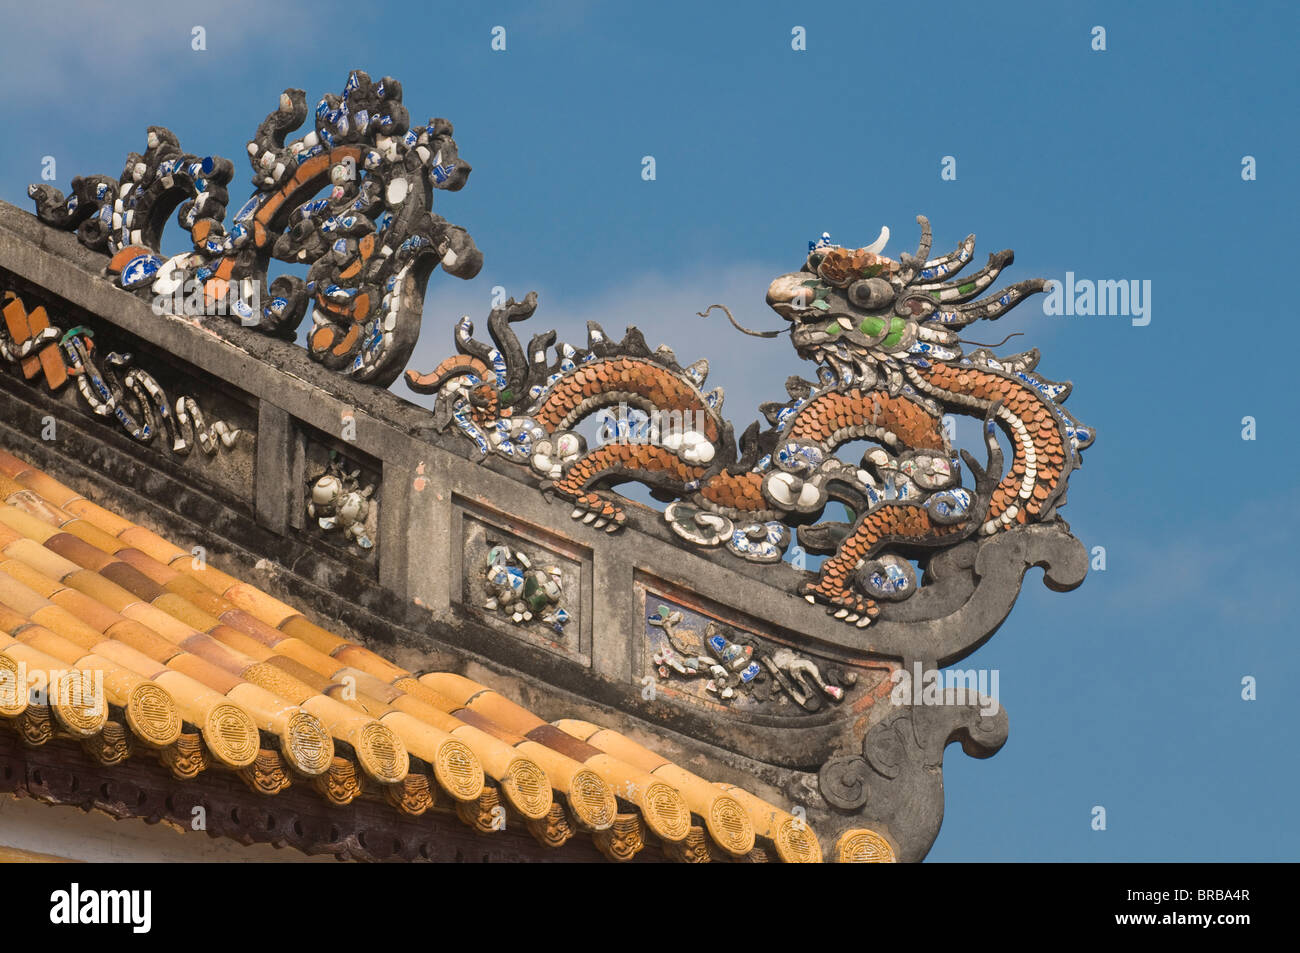 Dragons on top of the roof of the Halls of the Mandarins, Hue, Vietnam, Indochina, Southeast Asia, Asia Stock Photo